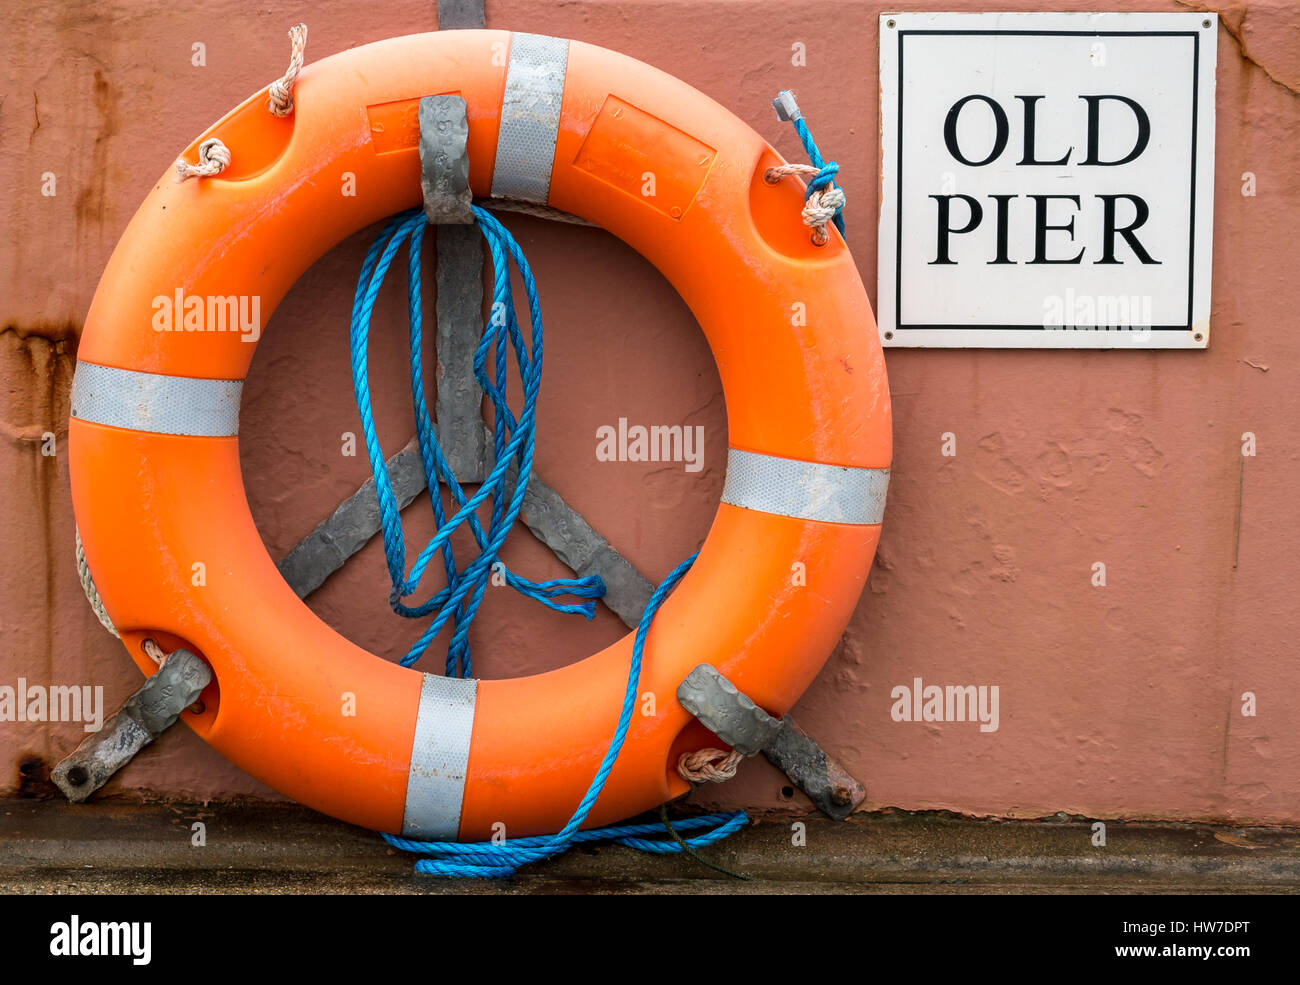 An Old Pier sign and lifebelt in a harbour Stock Photo